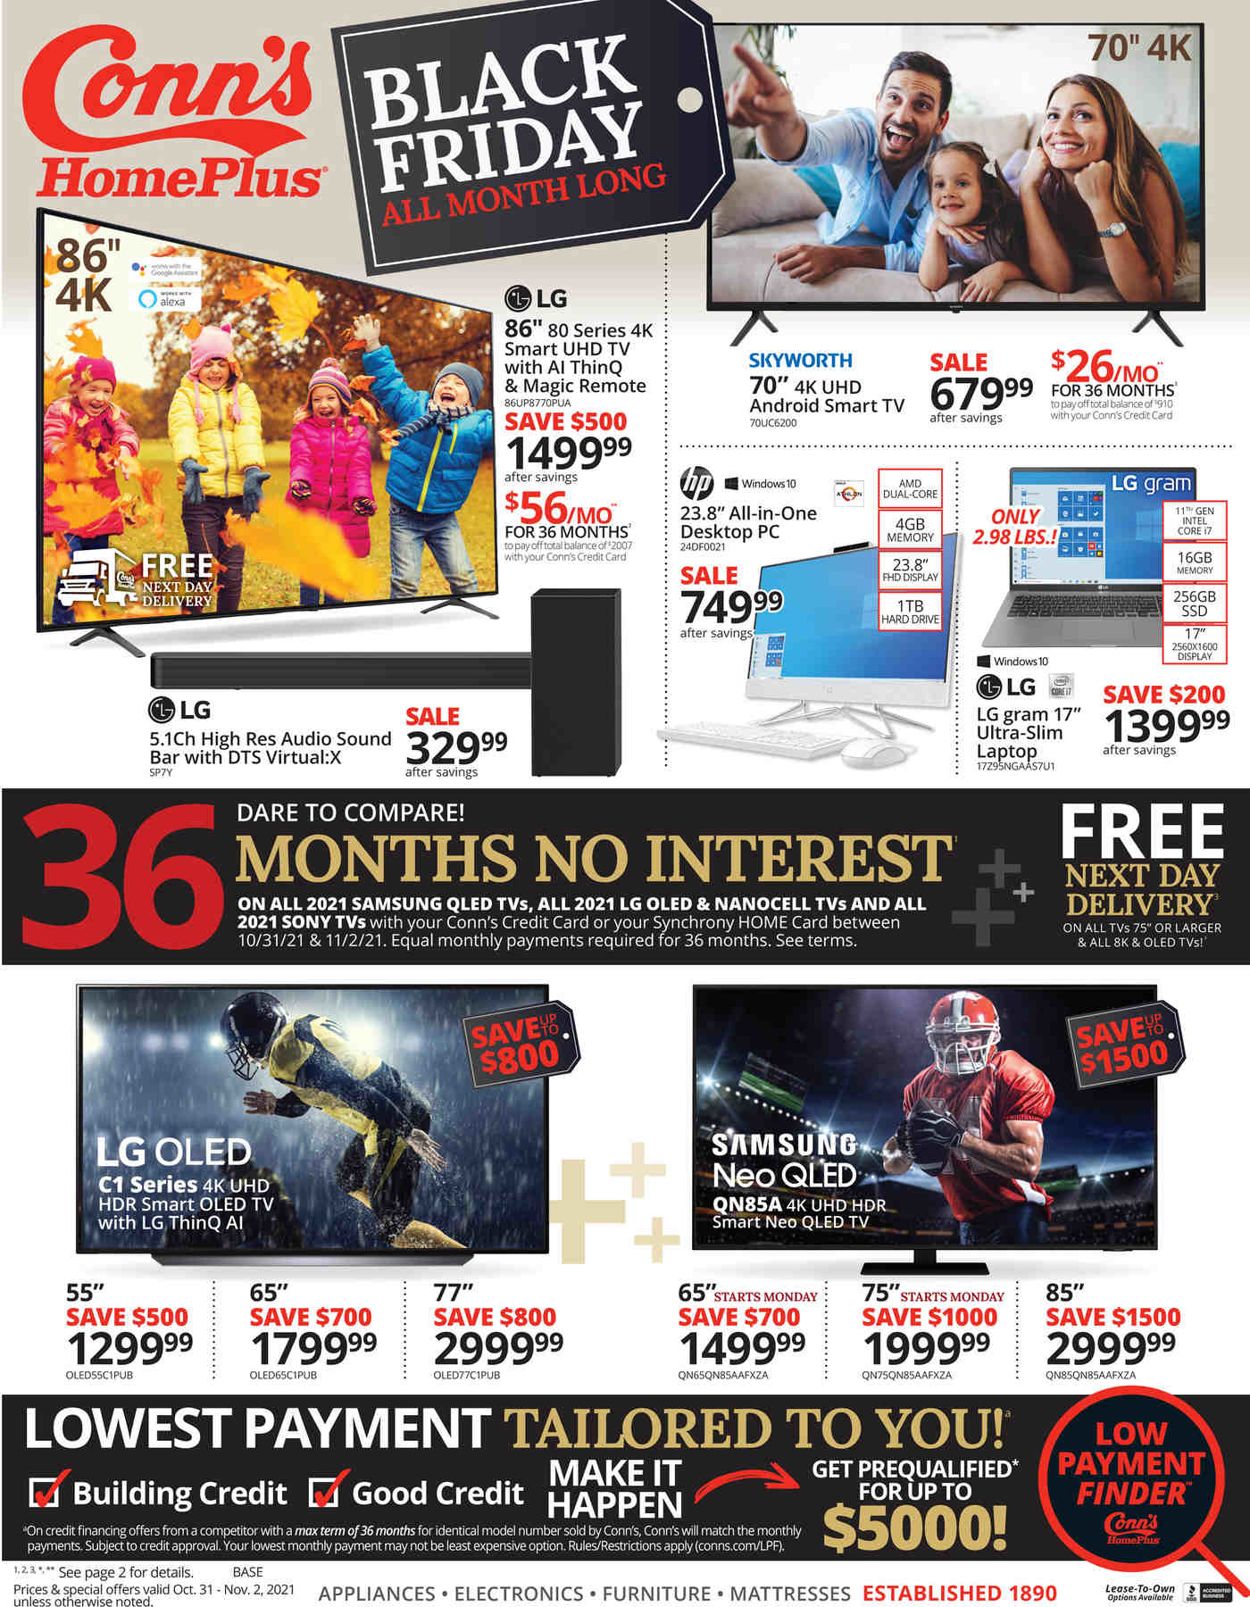 Conn's Home Plus BLACK FRIDAY 2021 Weekly Ad Circular - valid 10/31-11/02/2021